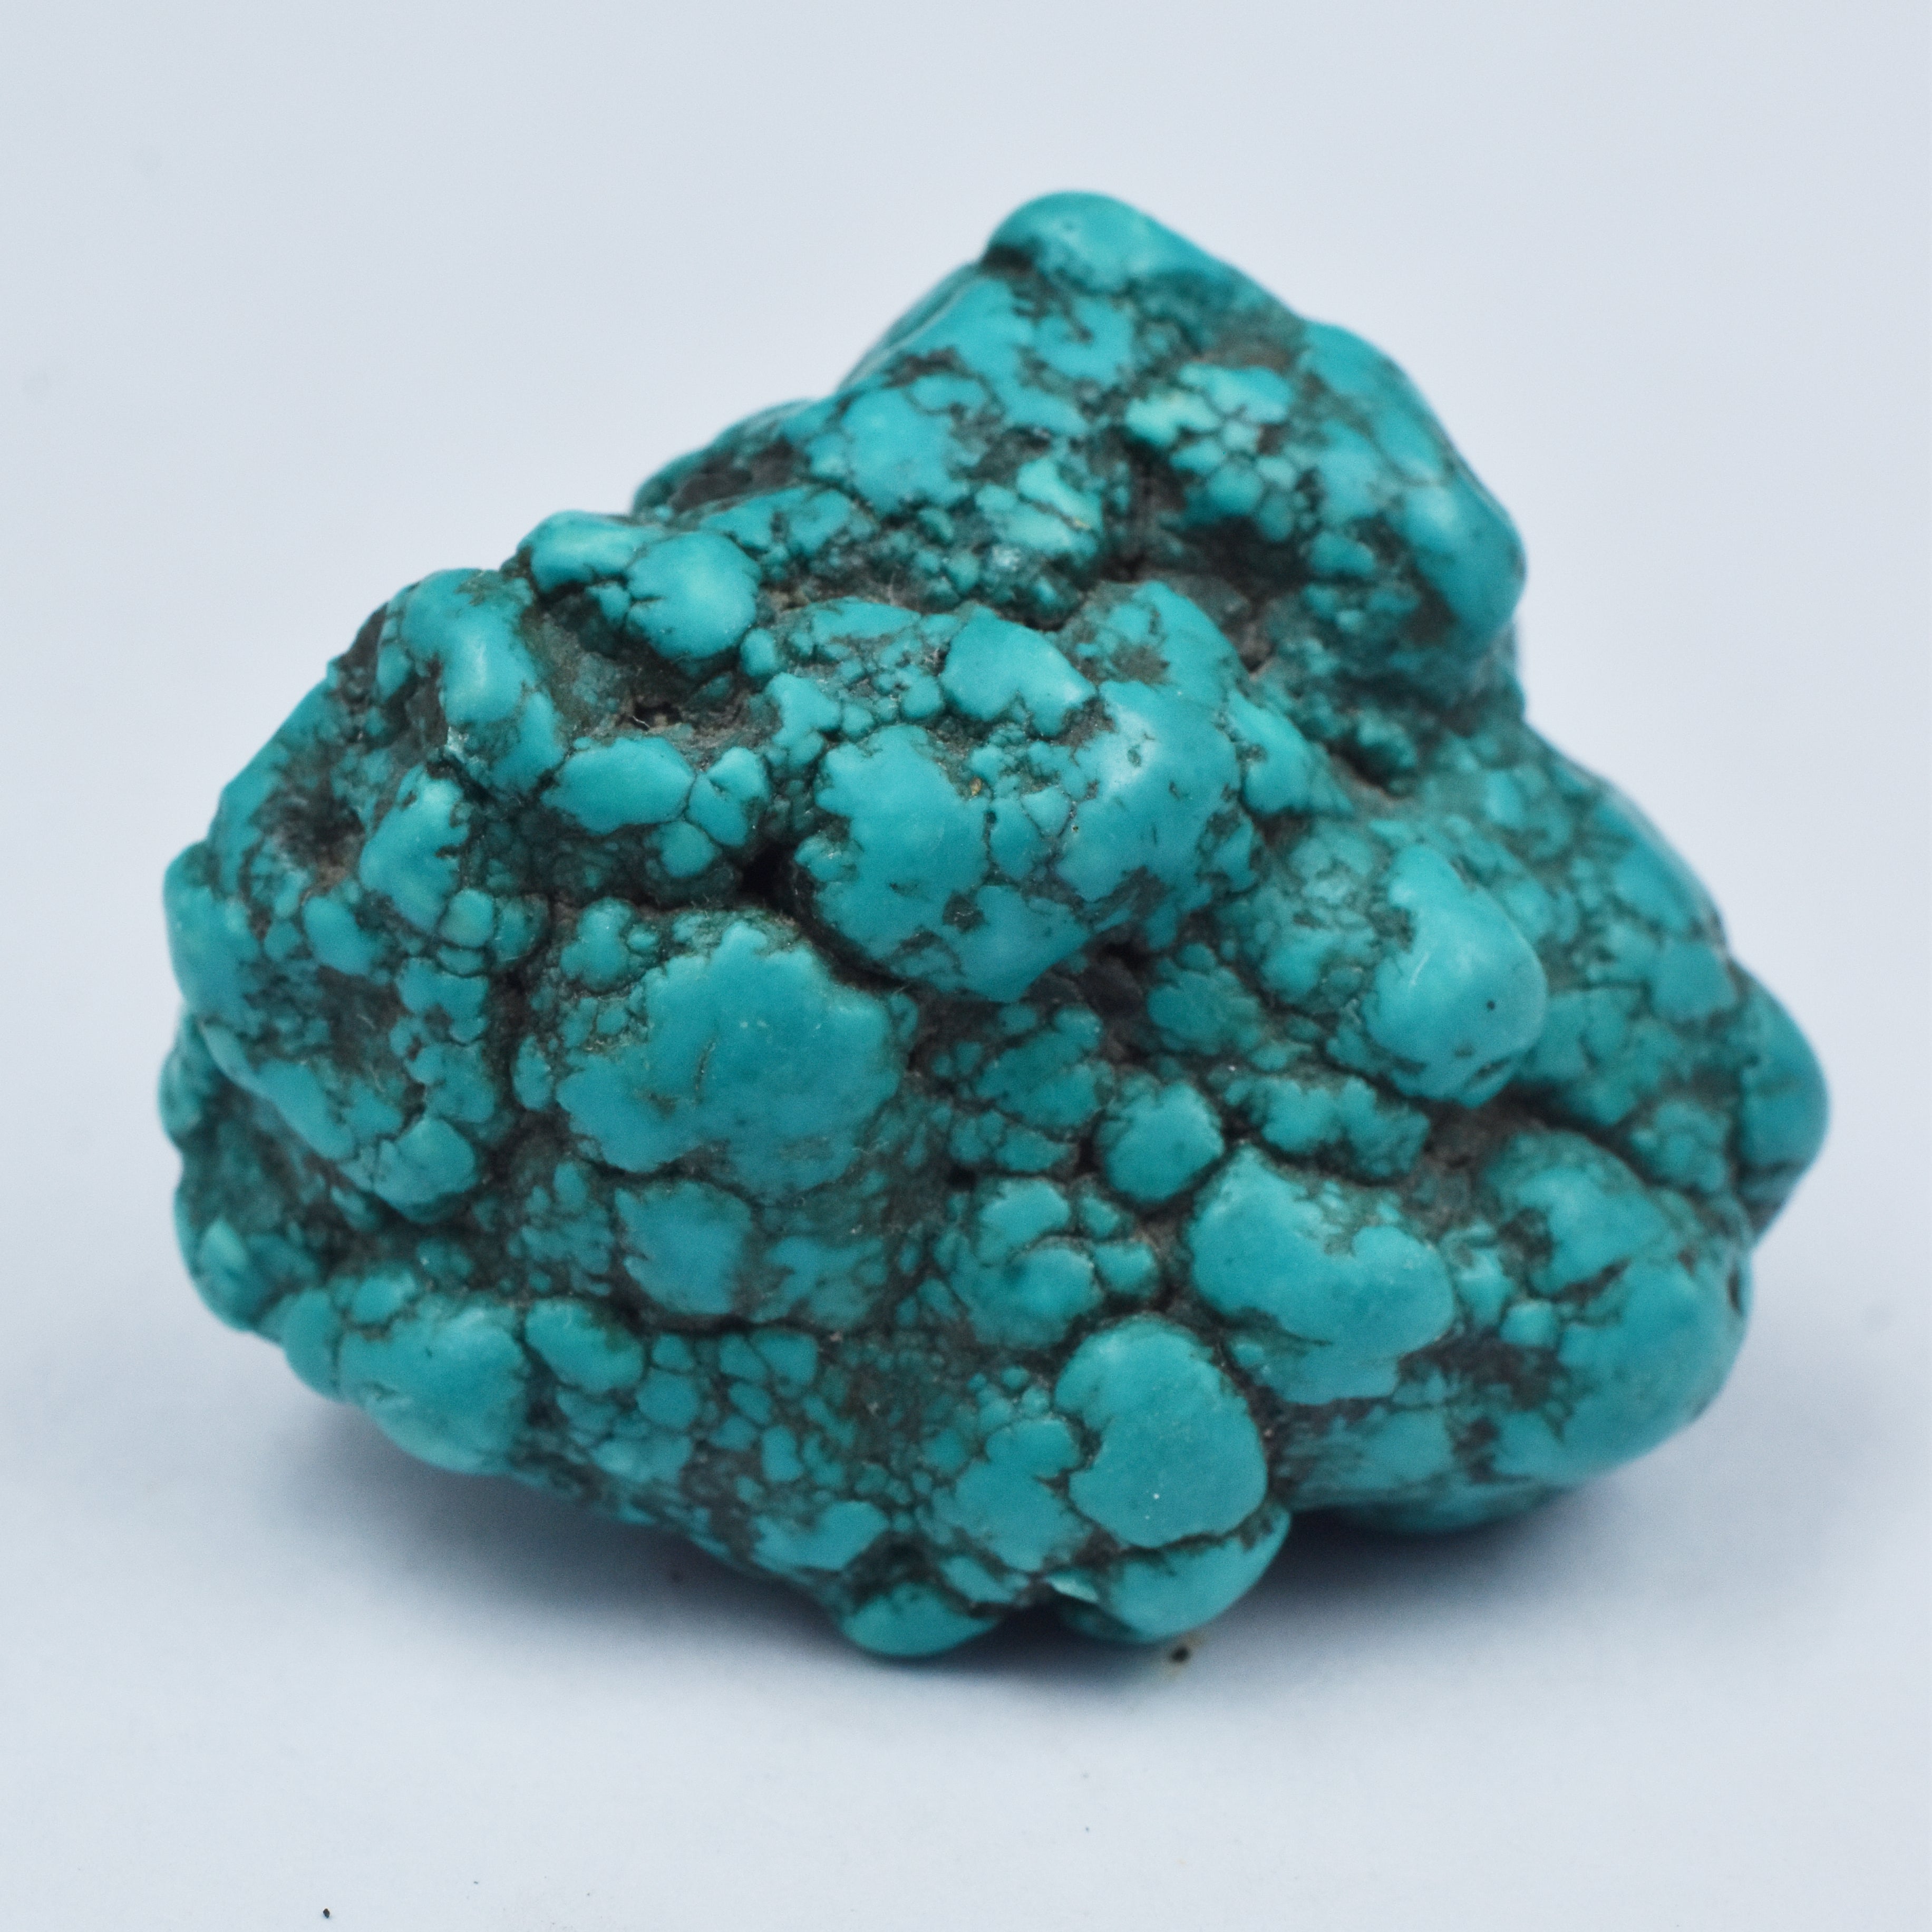 Turquoise Rough Certified Natural 150-200 Carat Sky Blue Loose Gemstone Turquoise Rough Raw Gemstone Mineral Exclusive Specimen Base Free Shipping Free Gift